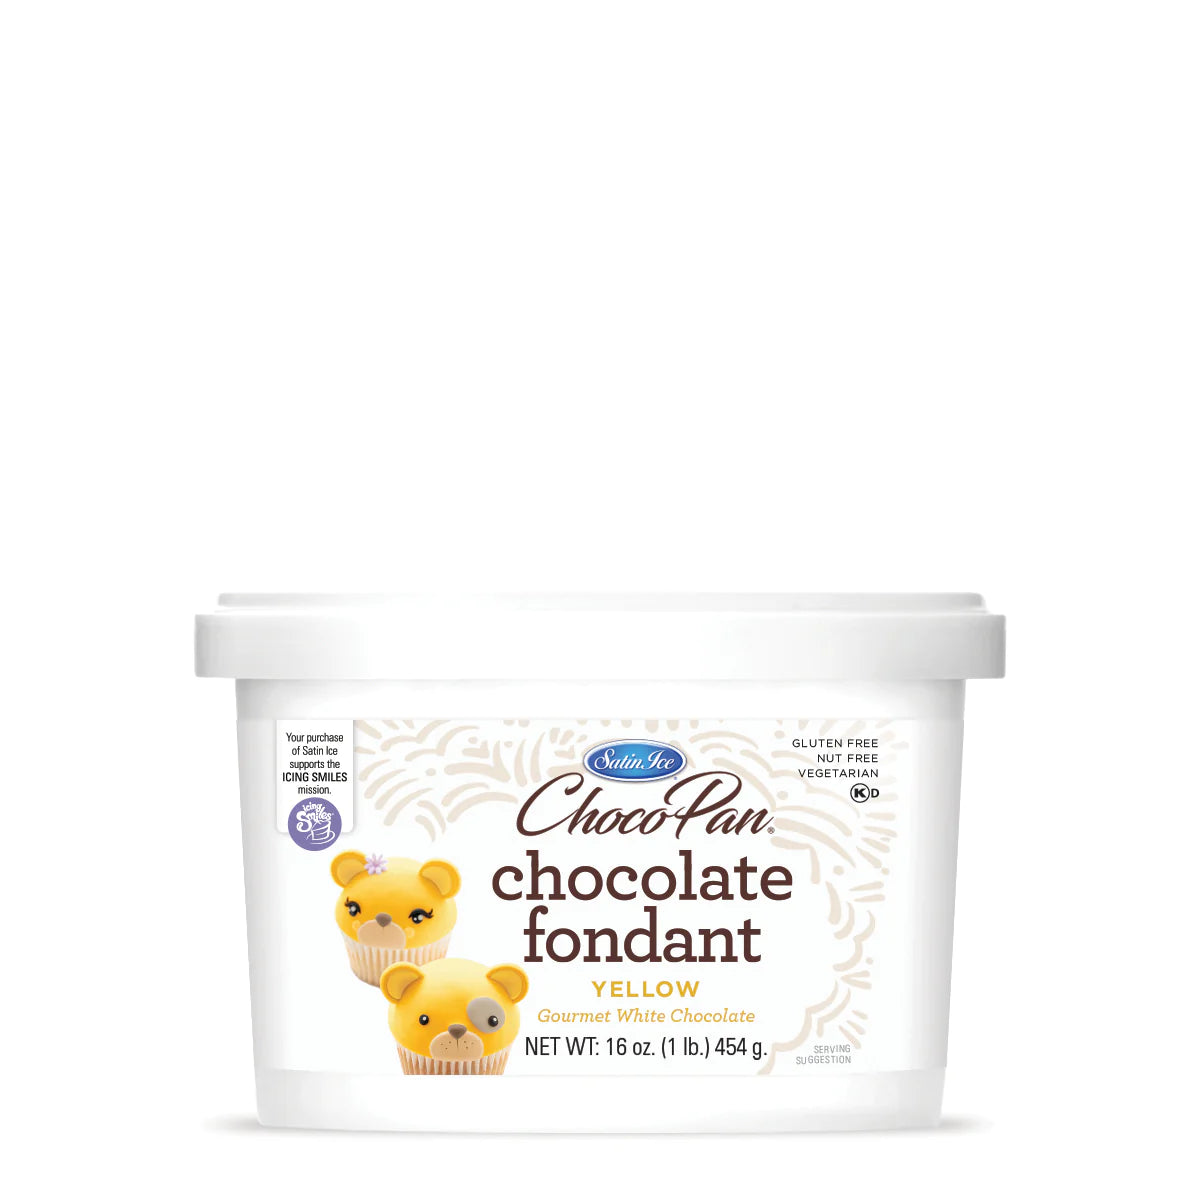 Yellow Colored and White Chocolate Flavored Fondant in a 1 Pound Container